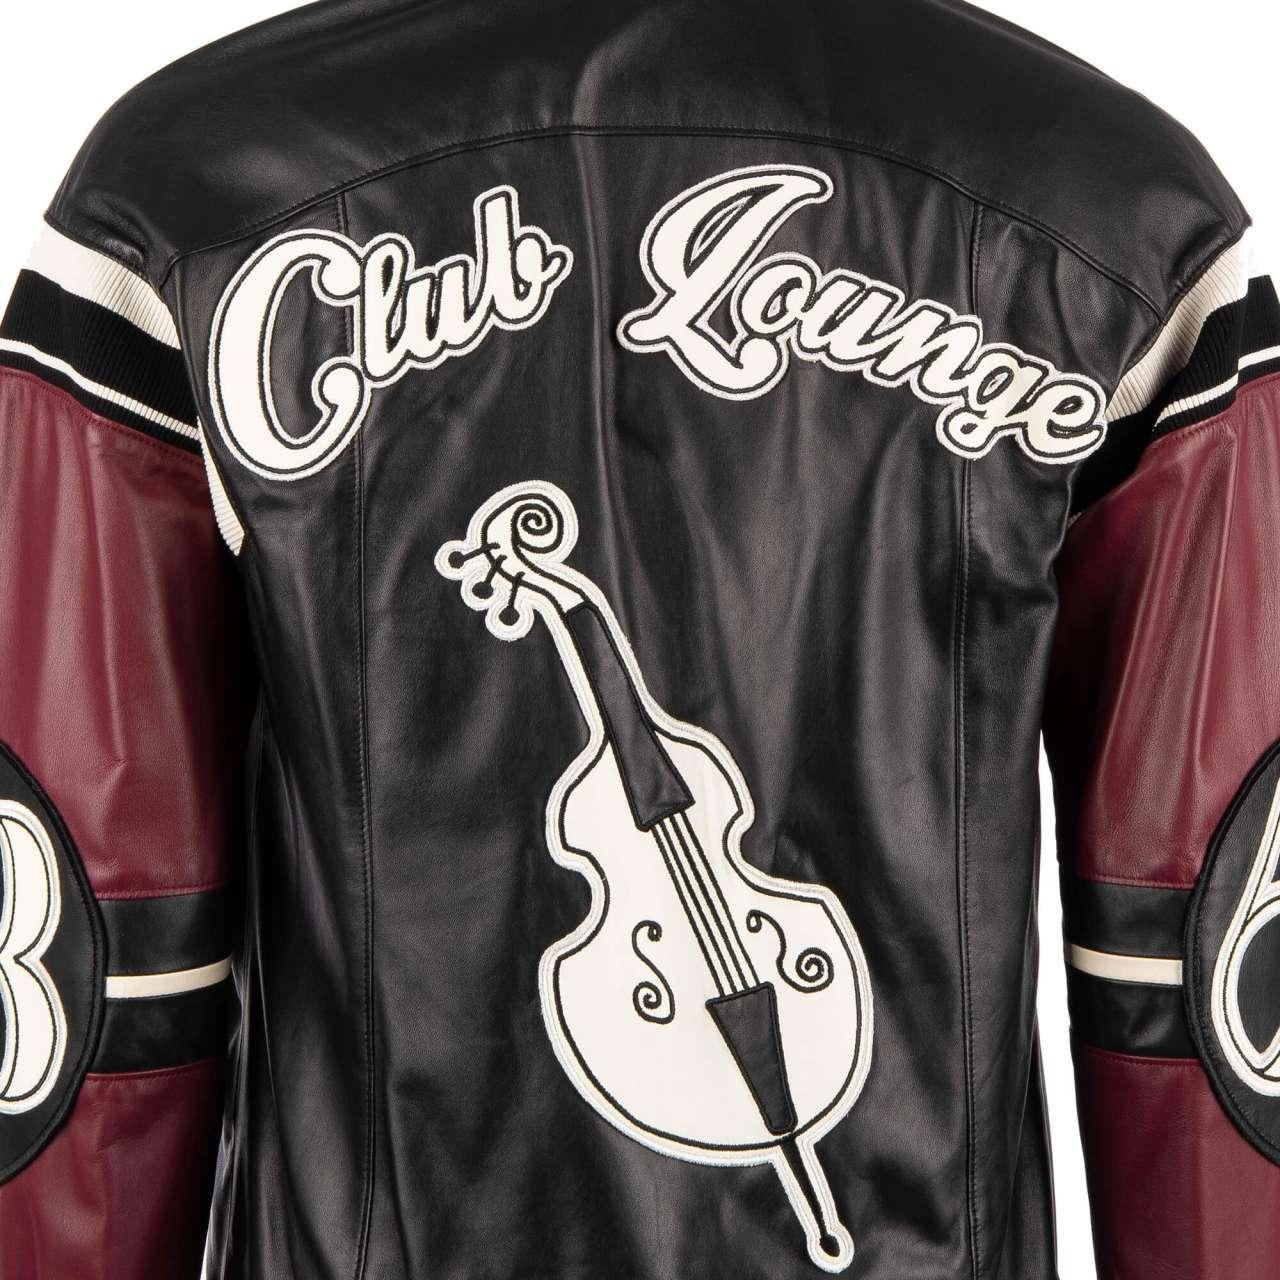 D&G Club Lounge Cello Embroidered Bomber Leather Jacket Black Bordeaux 46 For Sale 3